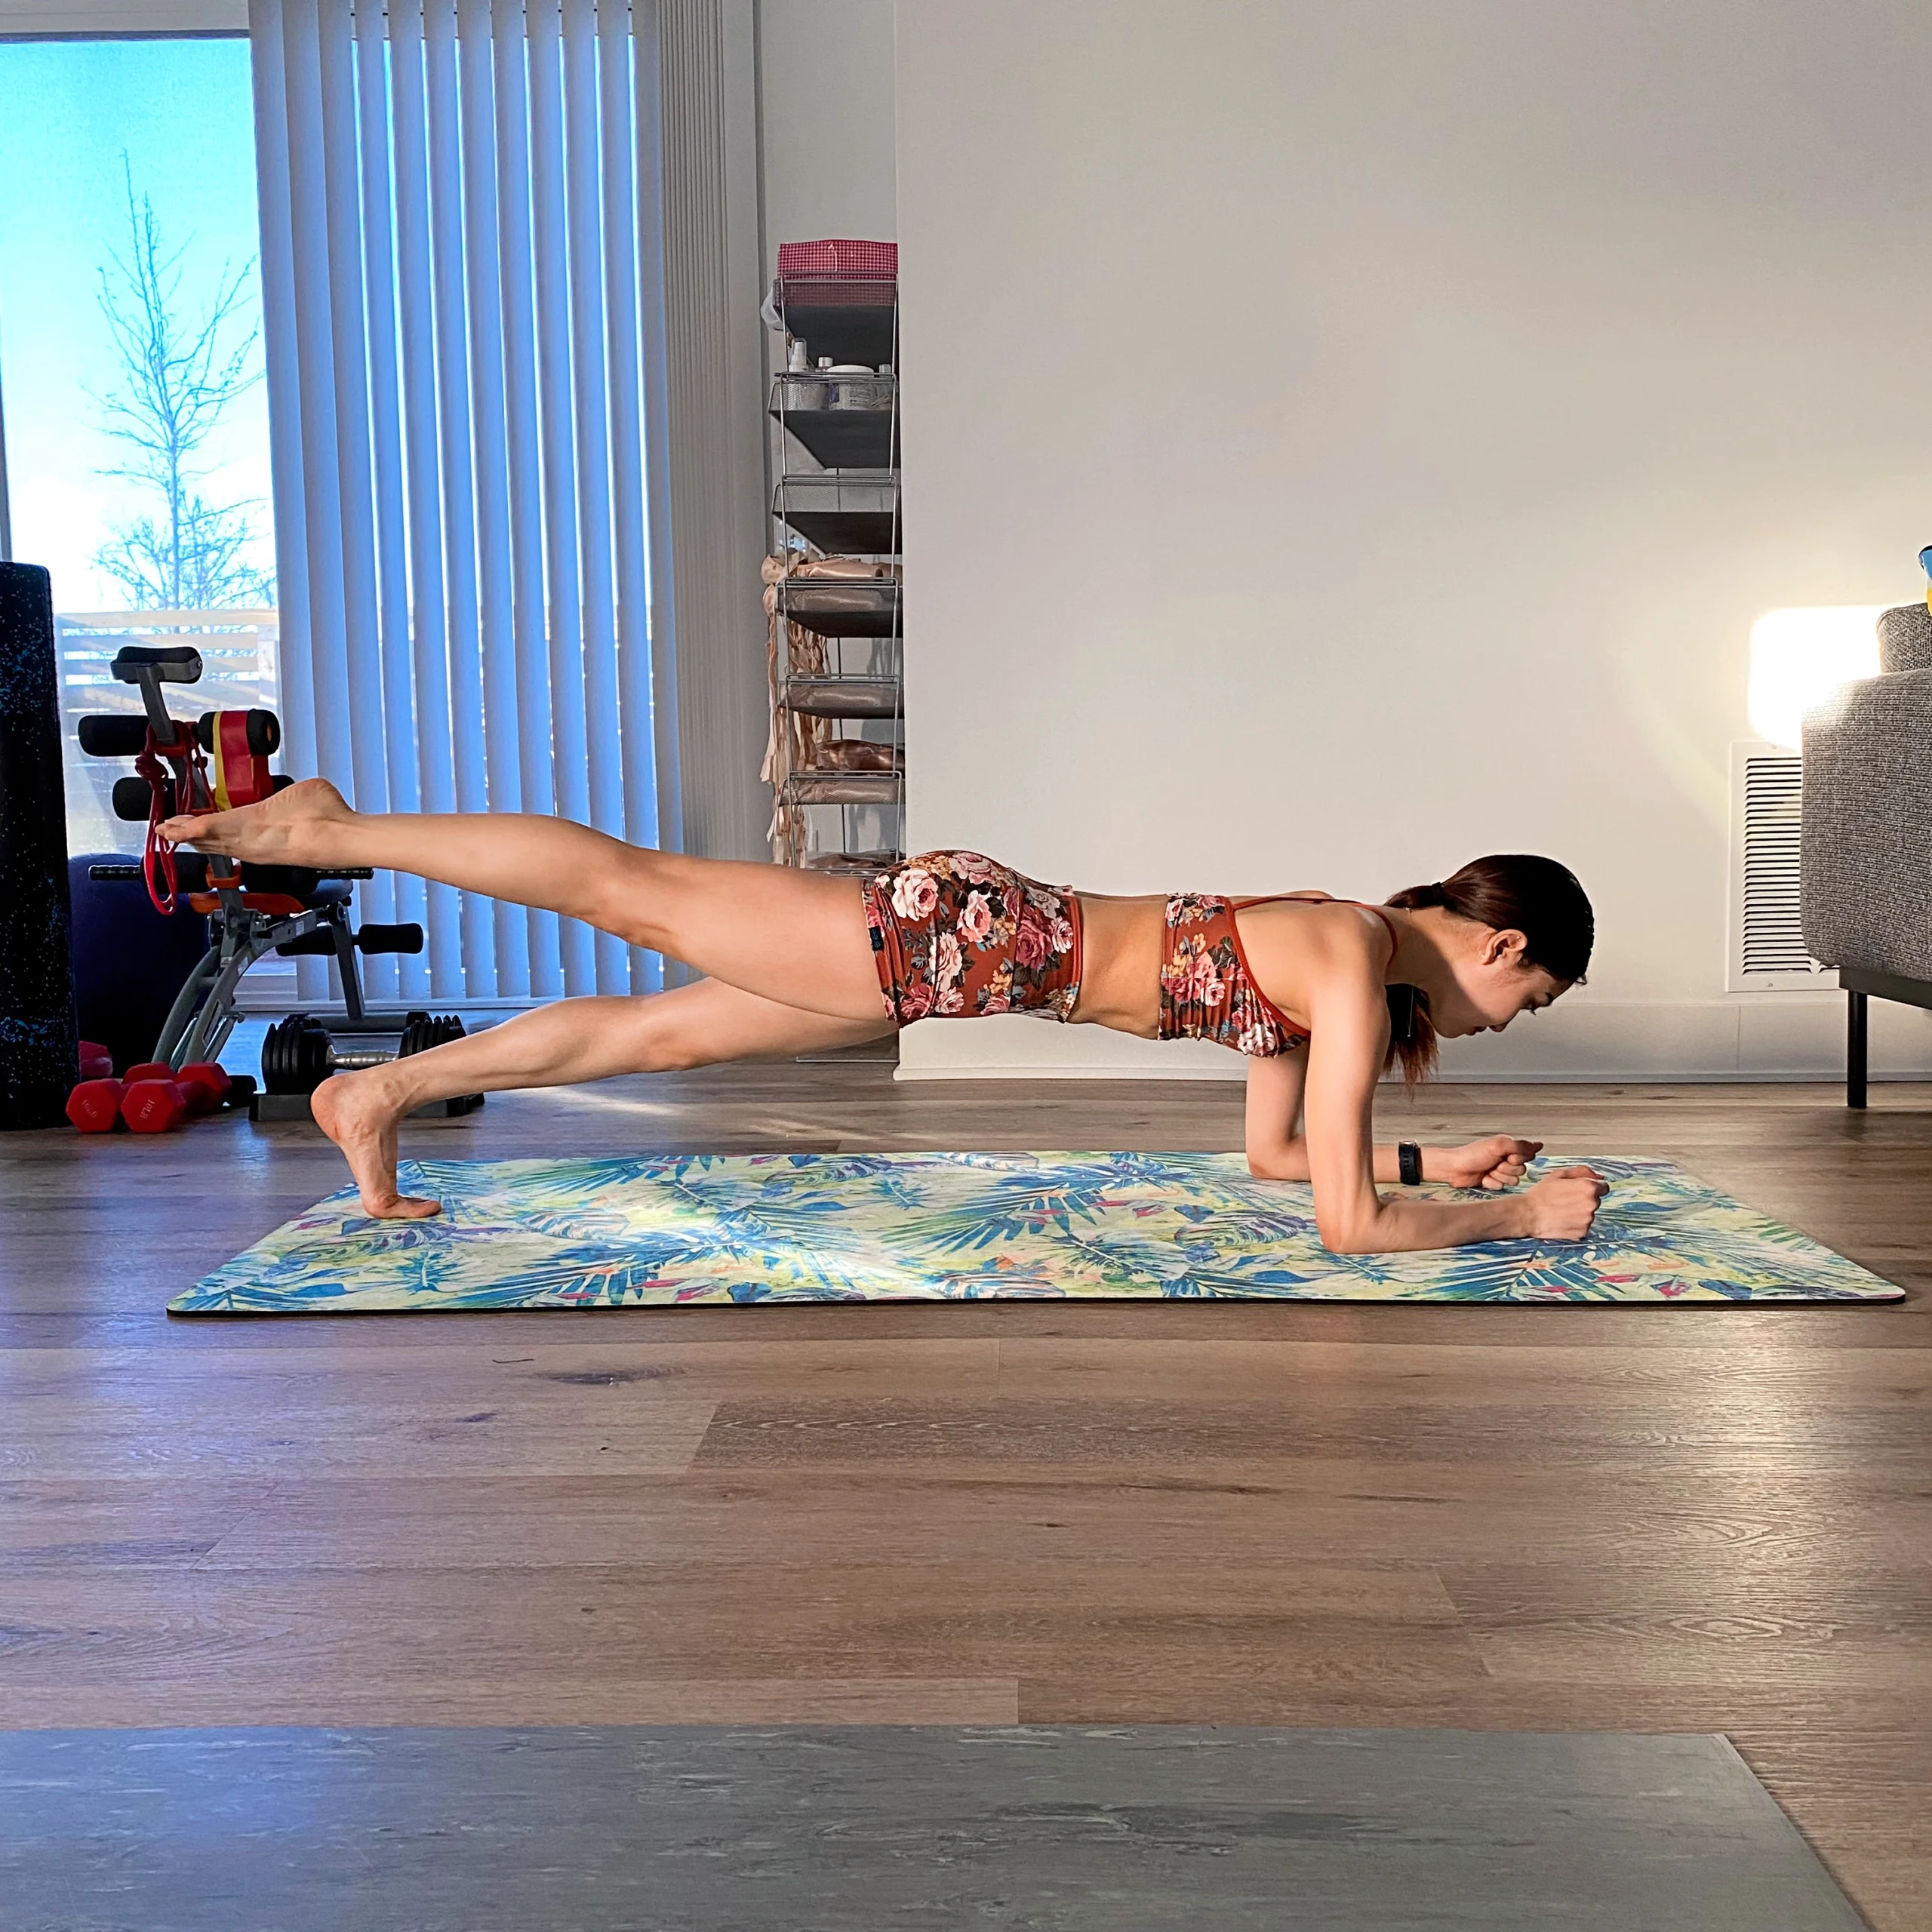 Yoshiko Kamikusa practices a plank exercise on a colorful yoga mat in her living room. She wears a pink and white floral sports bar and matching bootie shorts.